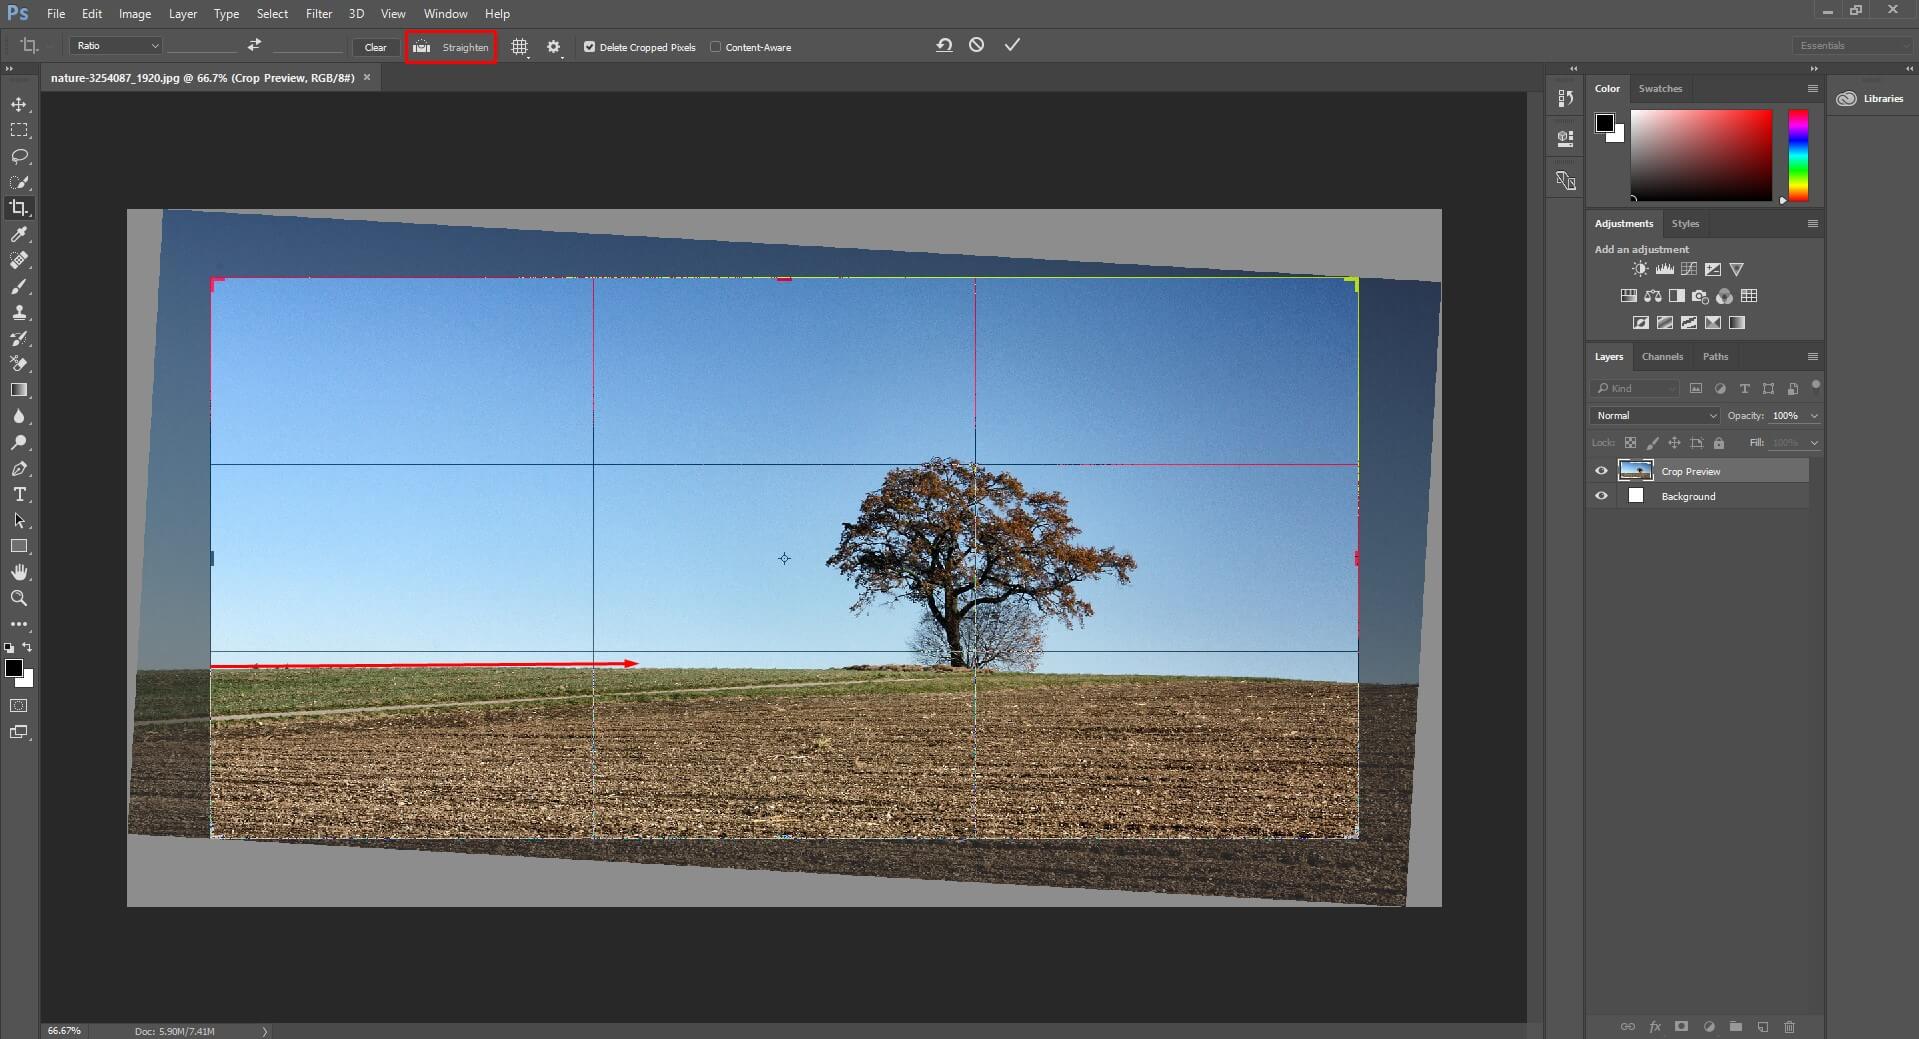 Select the Crop Tool and Use the Straighten Tool